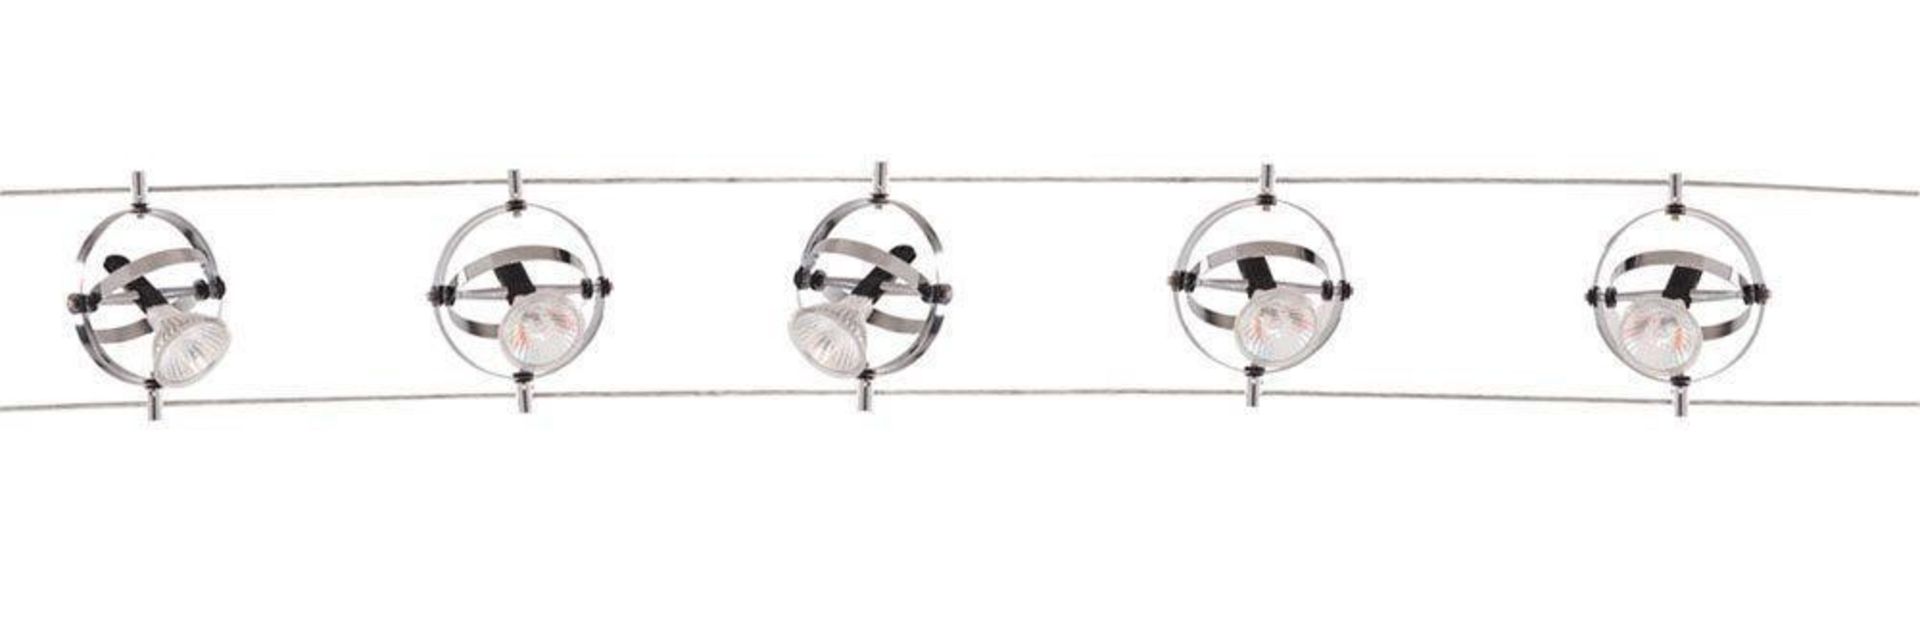 1 x Five Light LED Cable Kit With Adjustable Gyroscope Light Heads - Chrome Finish - Ex Display Stoc